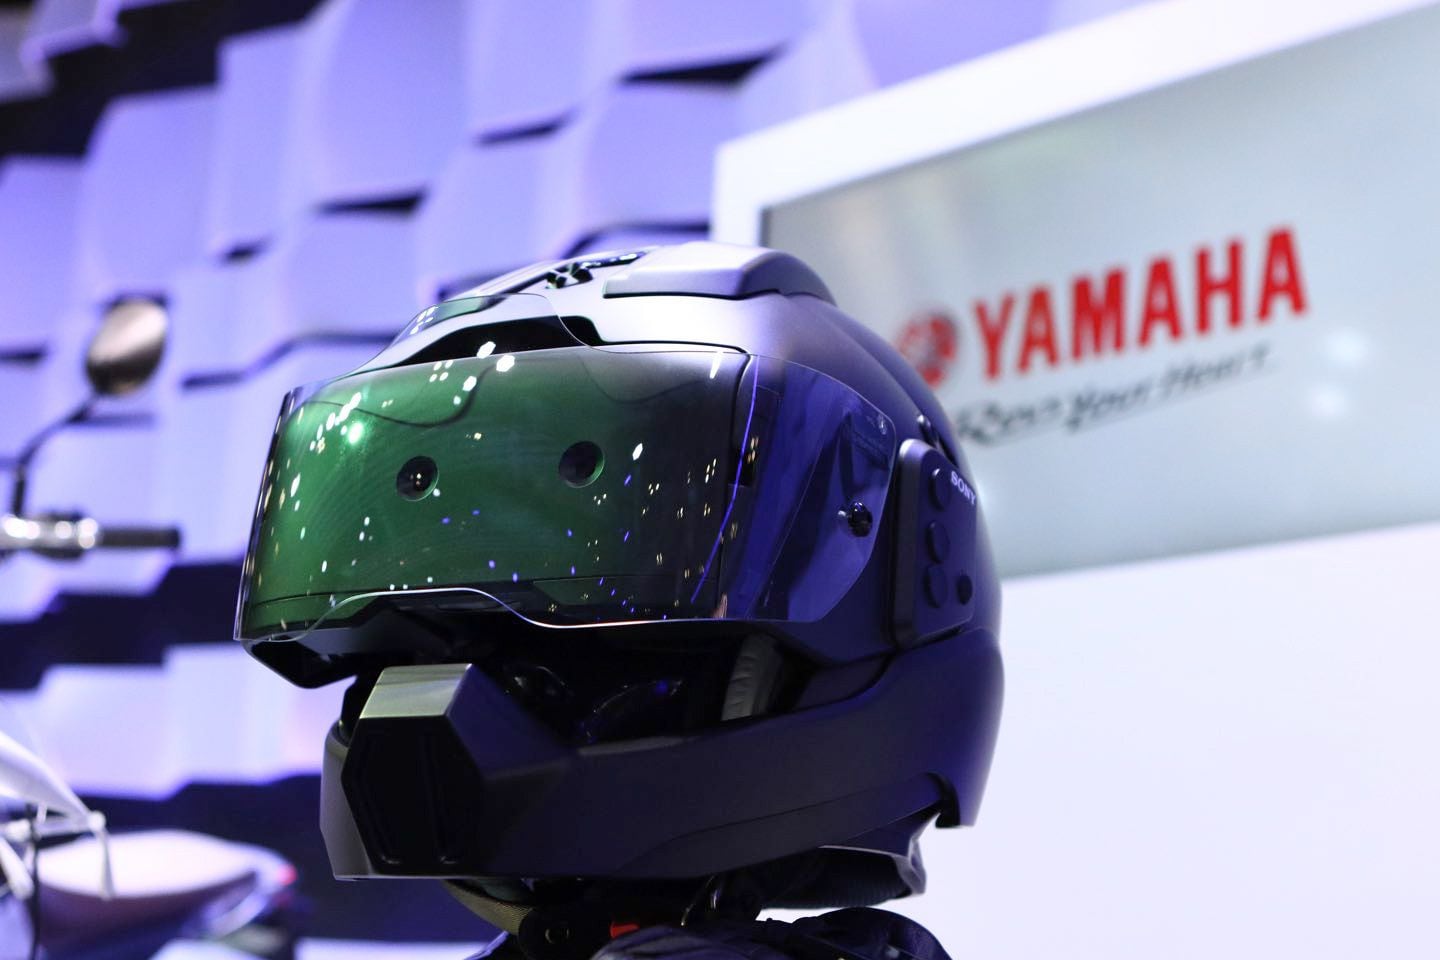 Yamaha has been working on HUD helmet displays and AR technology since it showed this version back in 2015.